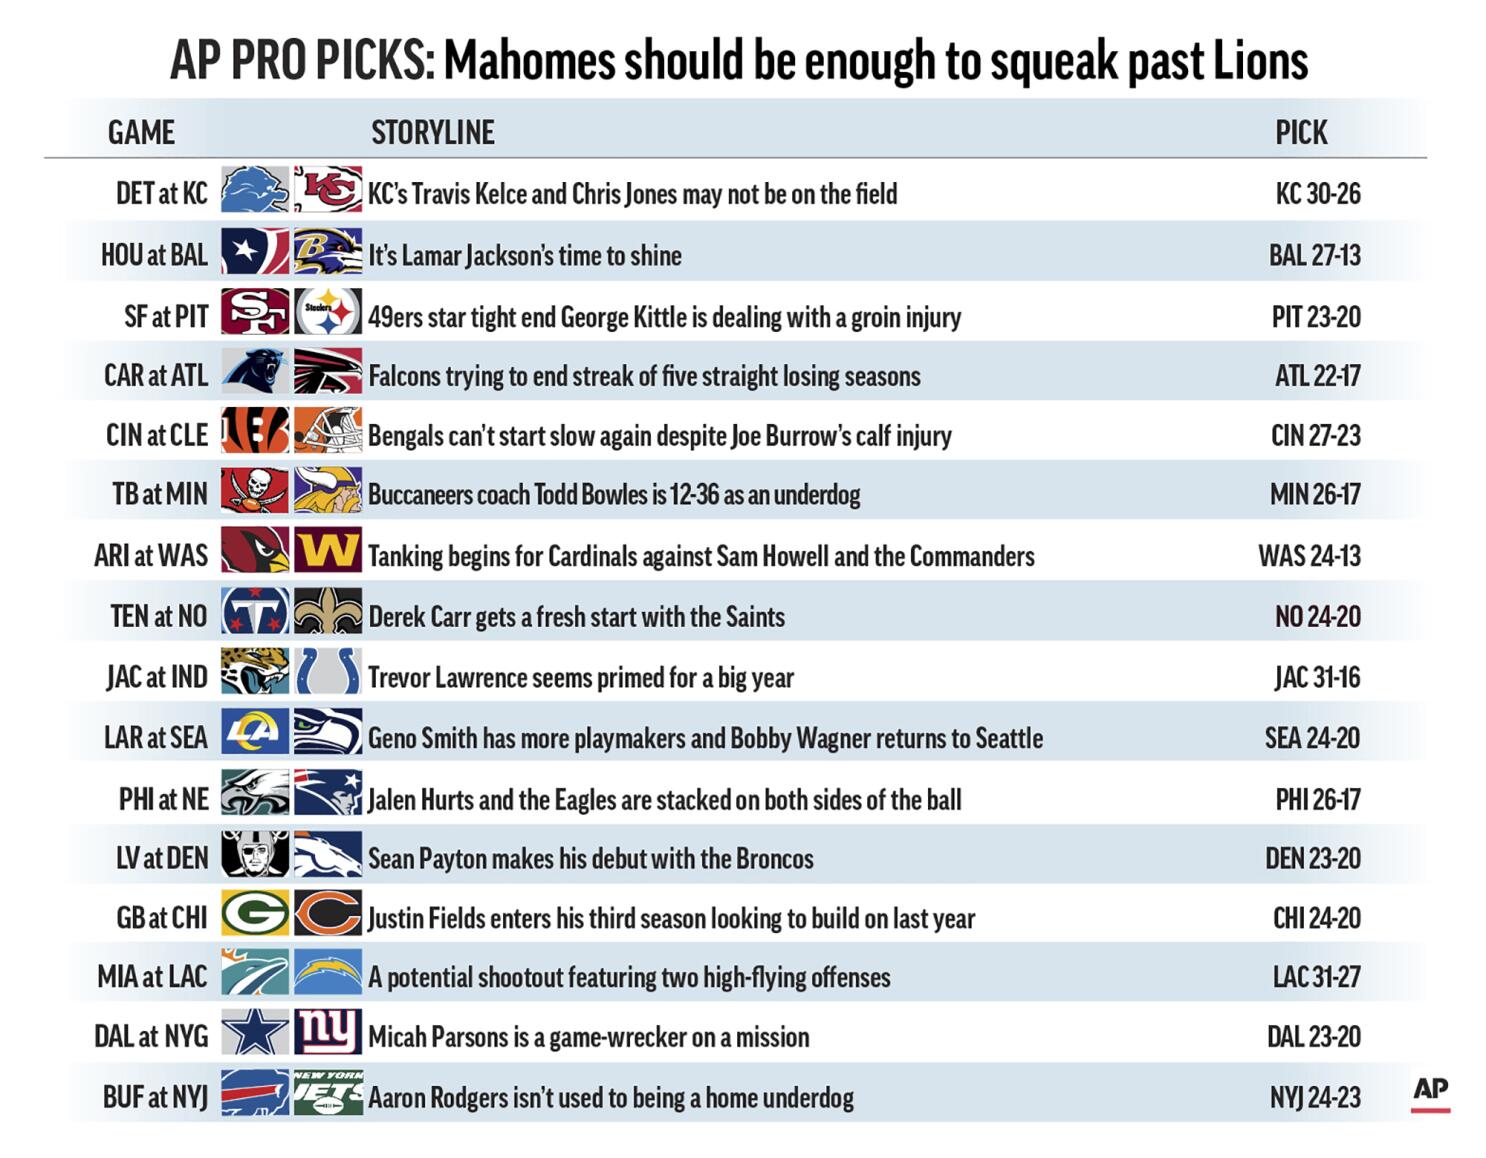 Pro Picks: Mahomes, Chiefs up for a tough task vs. Lions - The San